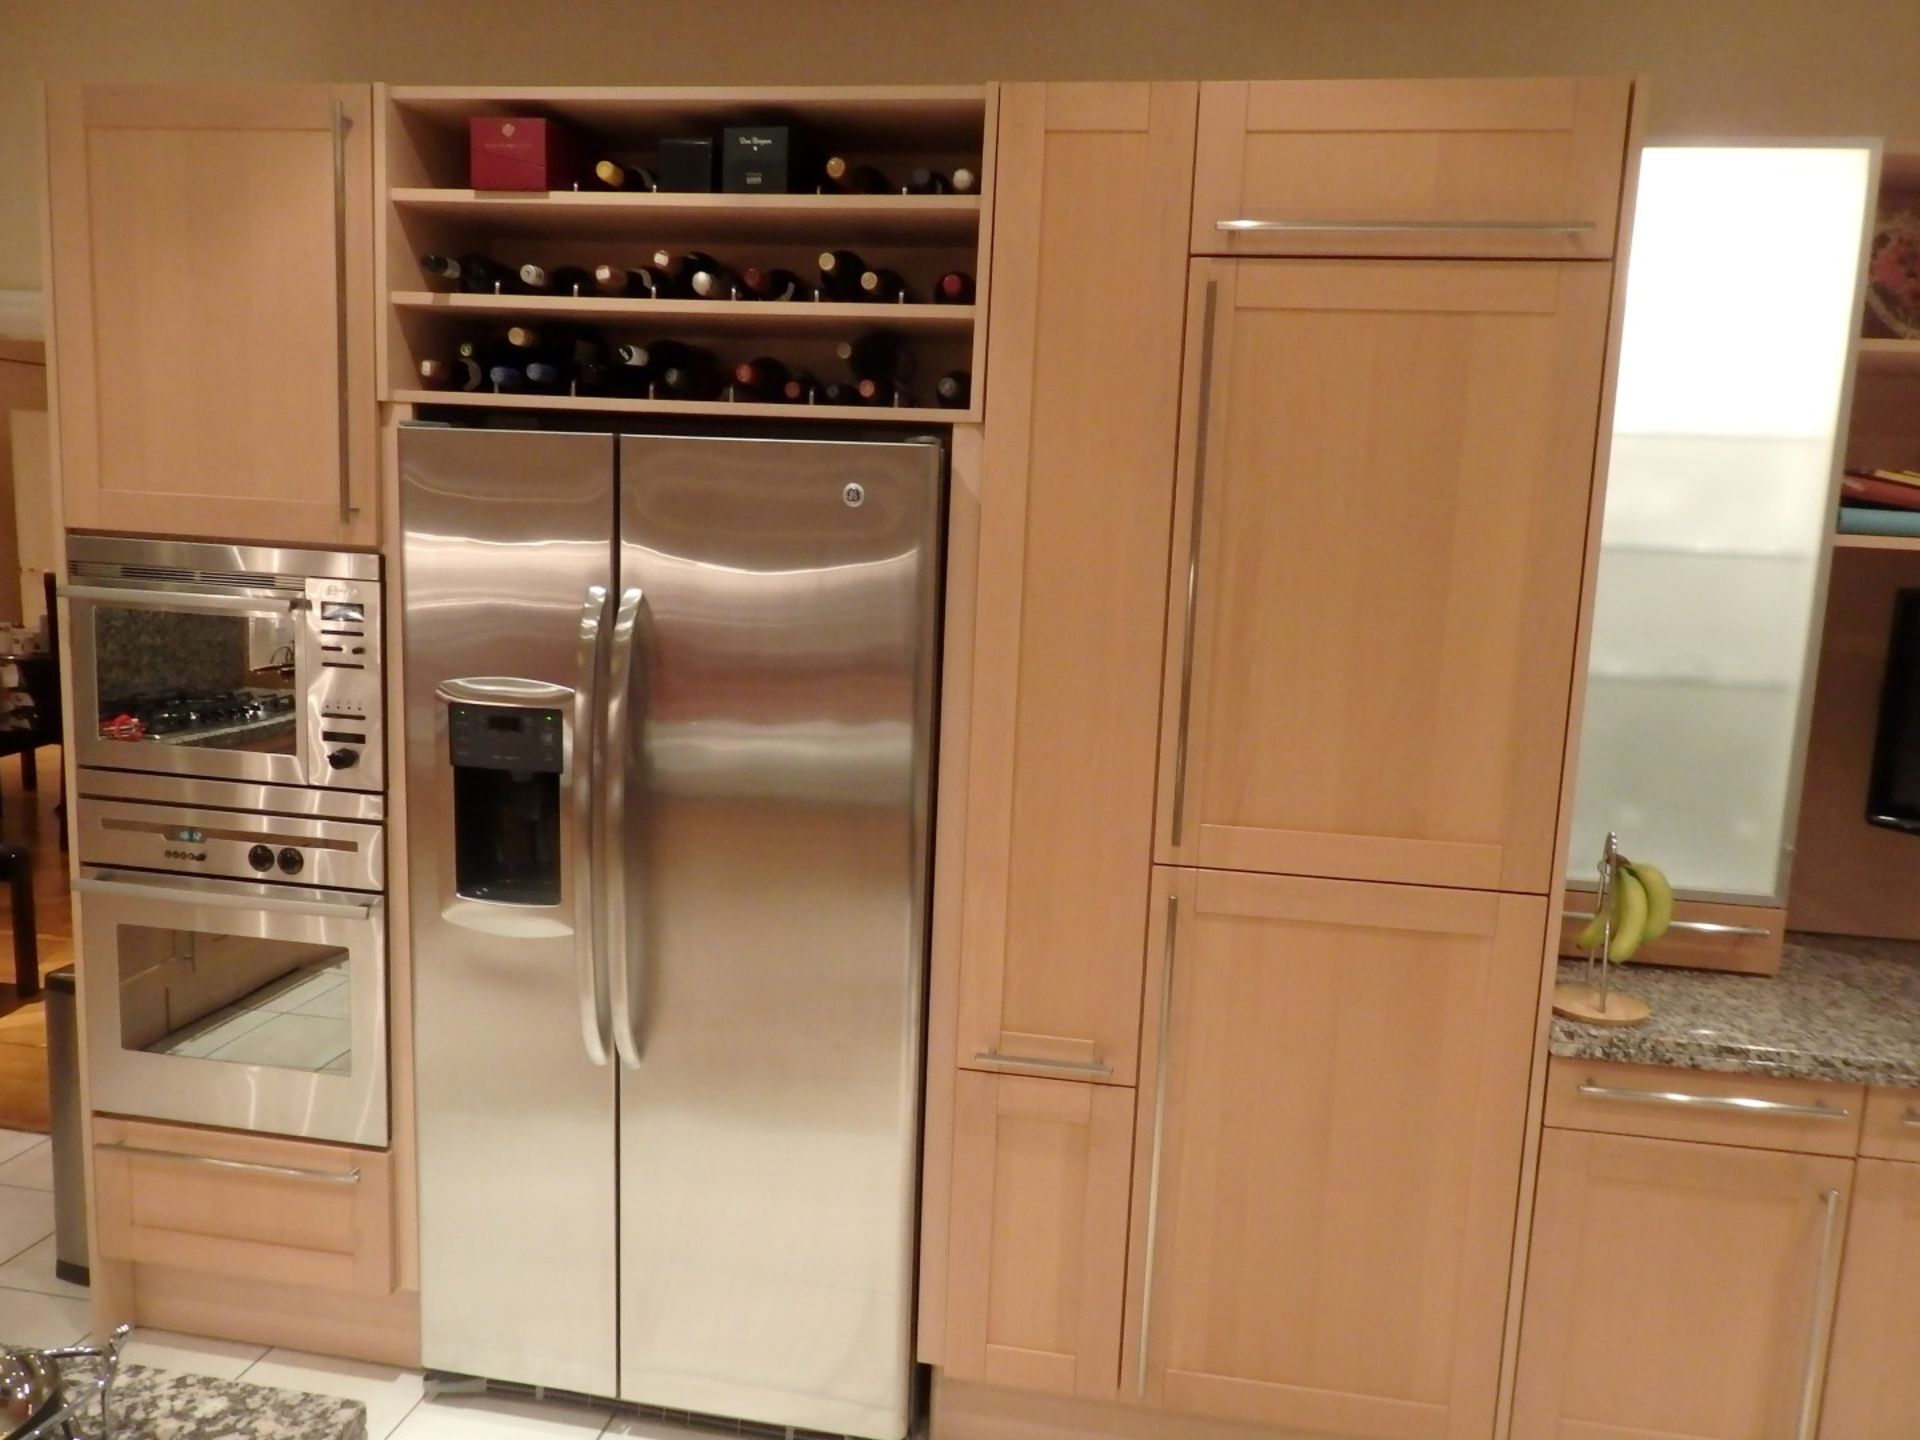 1 x Siematic Fitted Kitchen With Beech Shaker Style Doors, Granite Worktops, Central Island and - Image 109 of 148